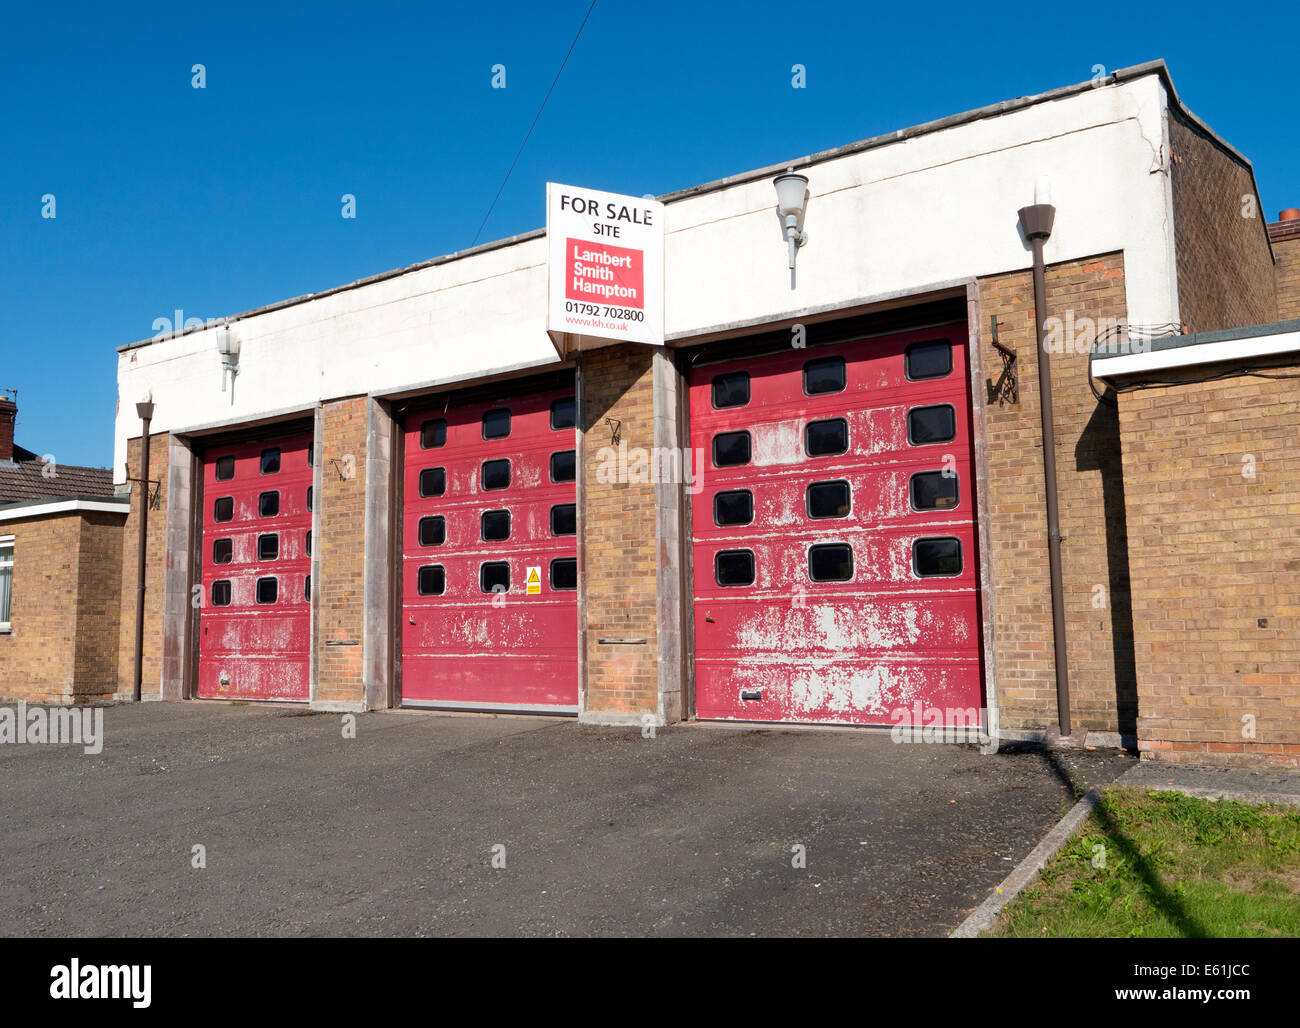 Old closed fire station building now for sale in Llandrindod Wells, Powys Wales UK. Stock Photo